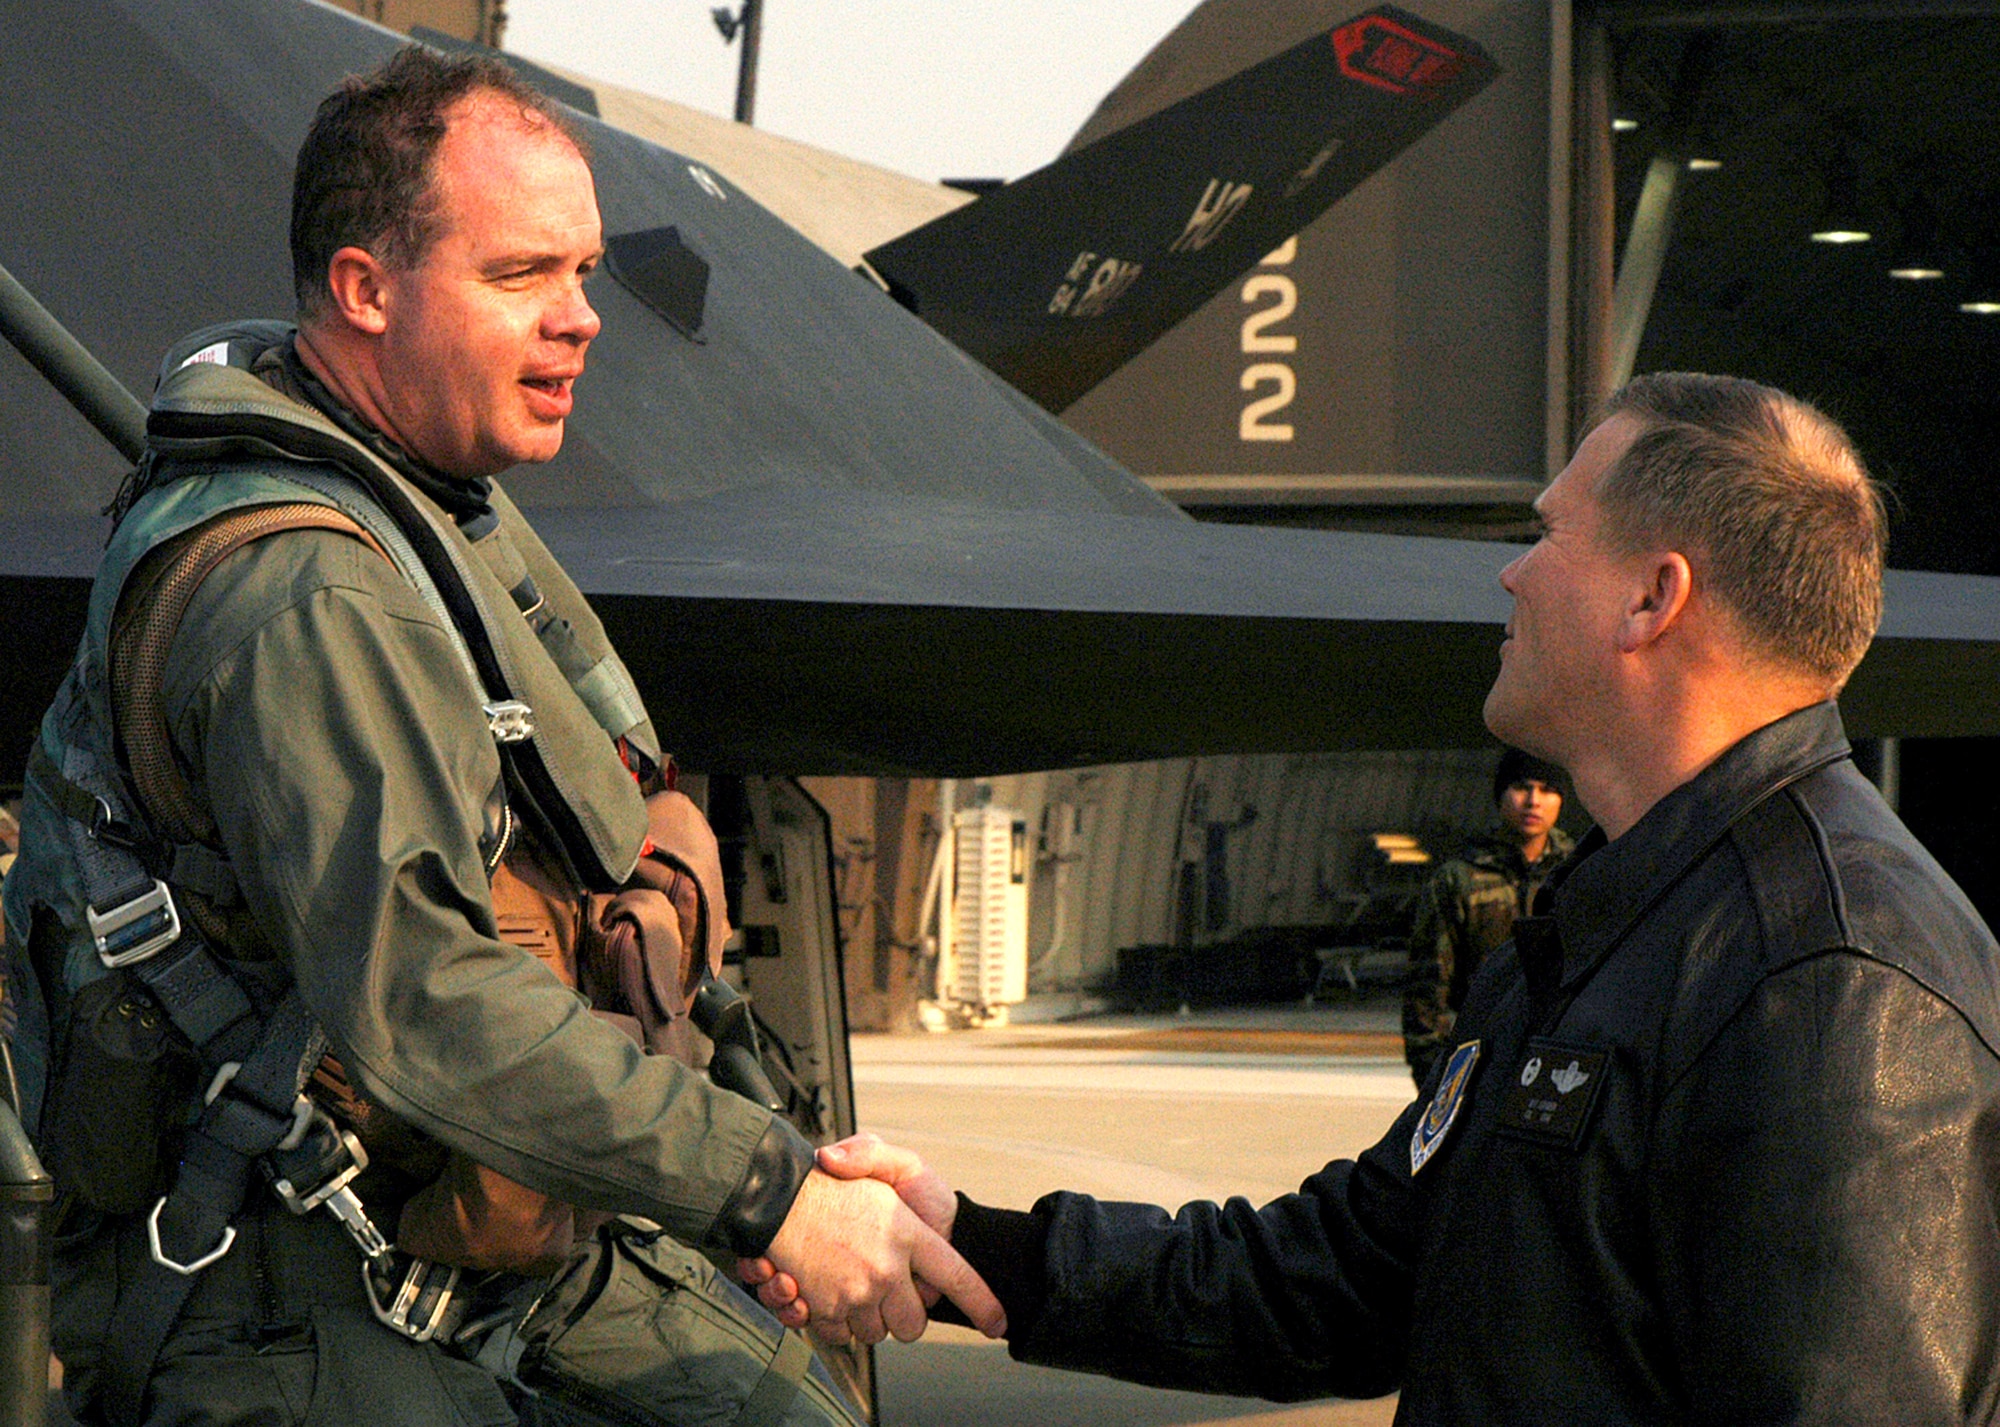 Col. Jeff Lofgren (right) greets Maj. Ronald Keller after landing Jan. 11 at Kunsan Air Base, Korea. Major Keller, an F-117 Nighthawk pilot, is part of a more than 300-person deployment to Kunsan from Holloman Air Force Base, N.M. Assigned to the 9th Expeditionary Fighter Squadron, the Holloman AFB Airmen are fulfilling an Air Expeditionary Force rotation to the Republic of Korea. The AEF deployment, according to Kunsan AB officials, "demonstrates the continued U.S. commitment to fulfill its security responsibilities throughout the Western Pacific." Colonel Lofgren is the 8th Fighter Wing commander. (U.S. Air Force photo/Senior Airman Stephen Collier)
                     